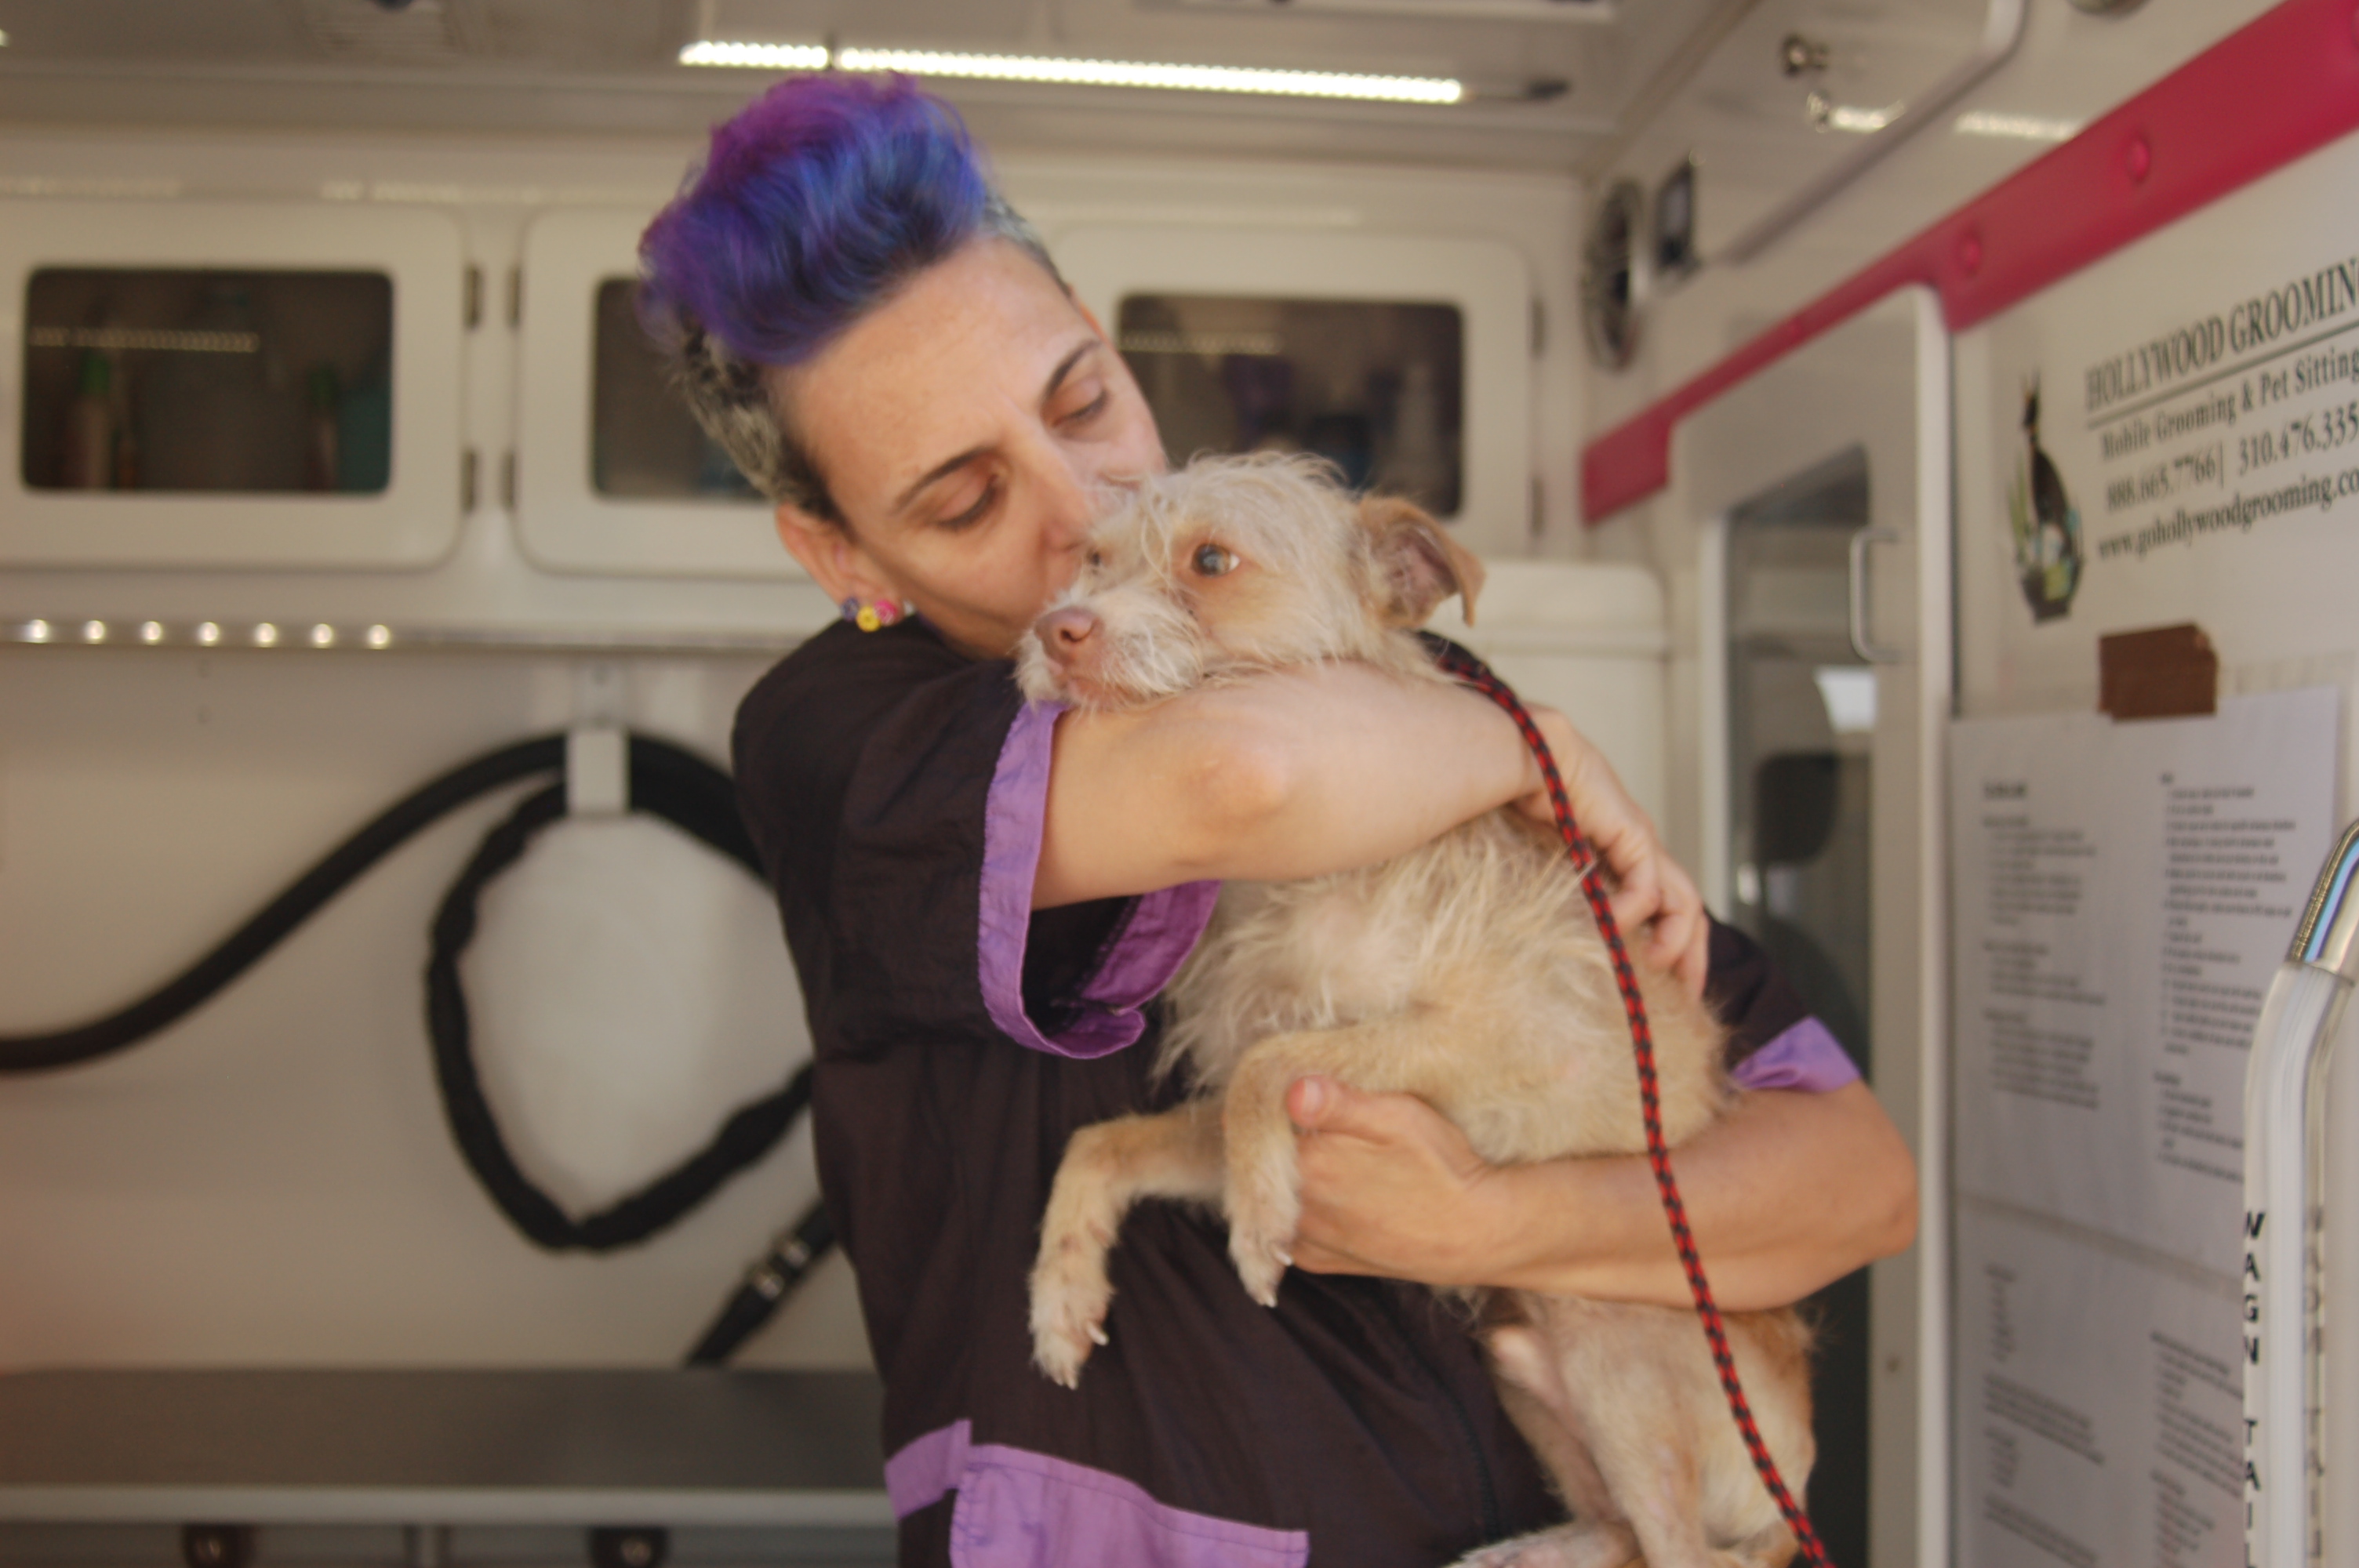 Yael hugs a dog at a Grooming Station at a community event.